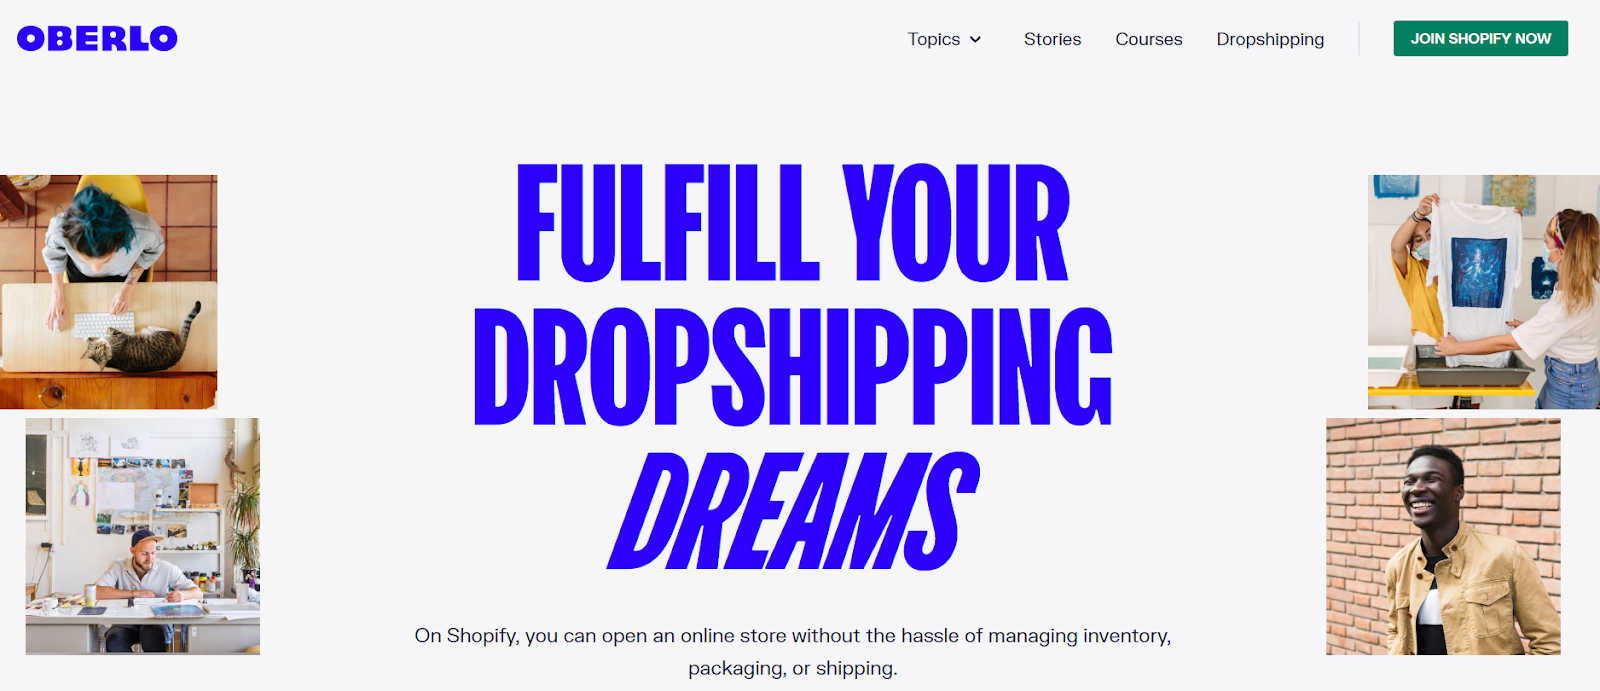 Use Oberlo to start a dropshipping business for an online income.